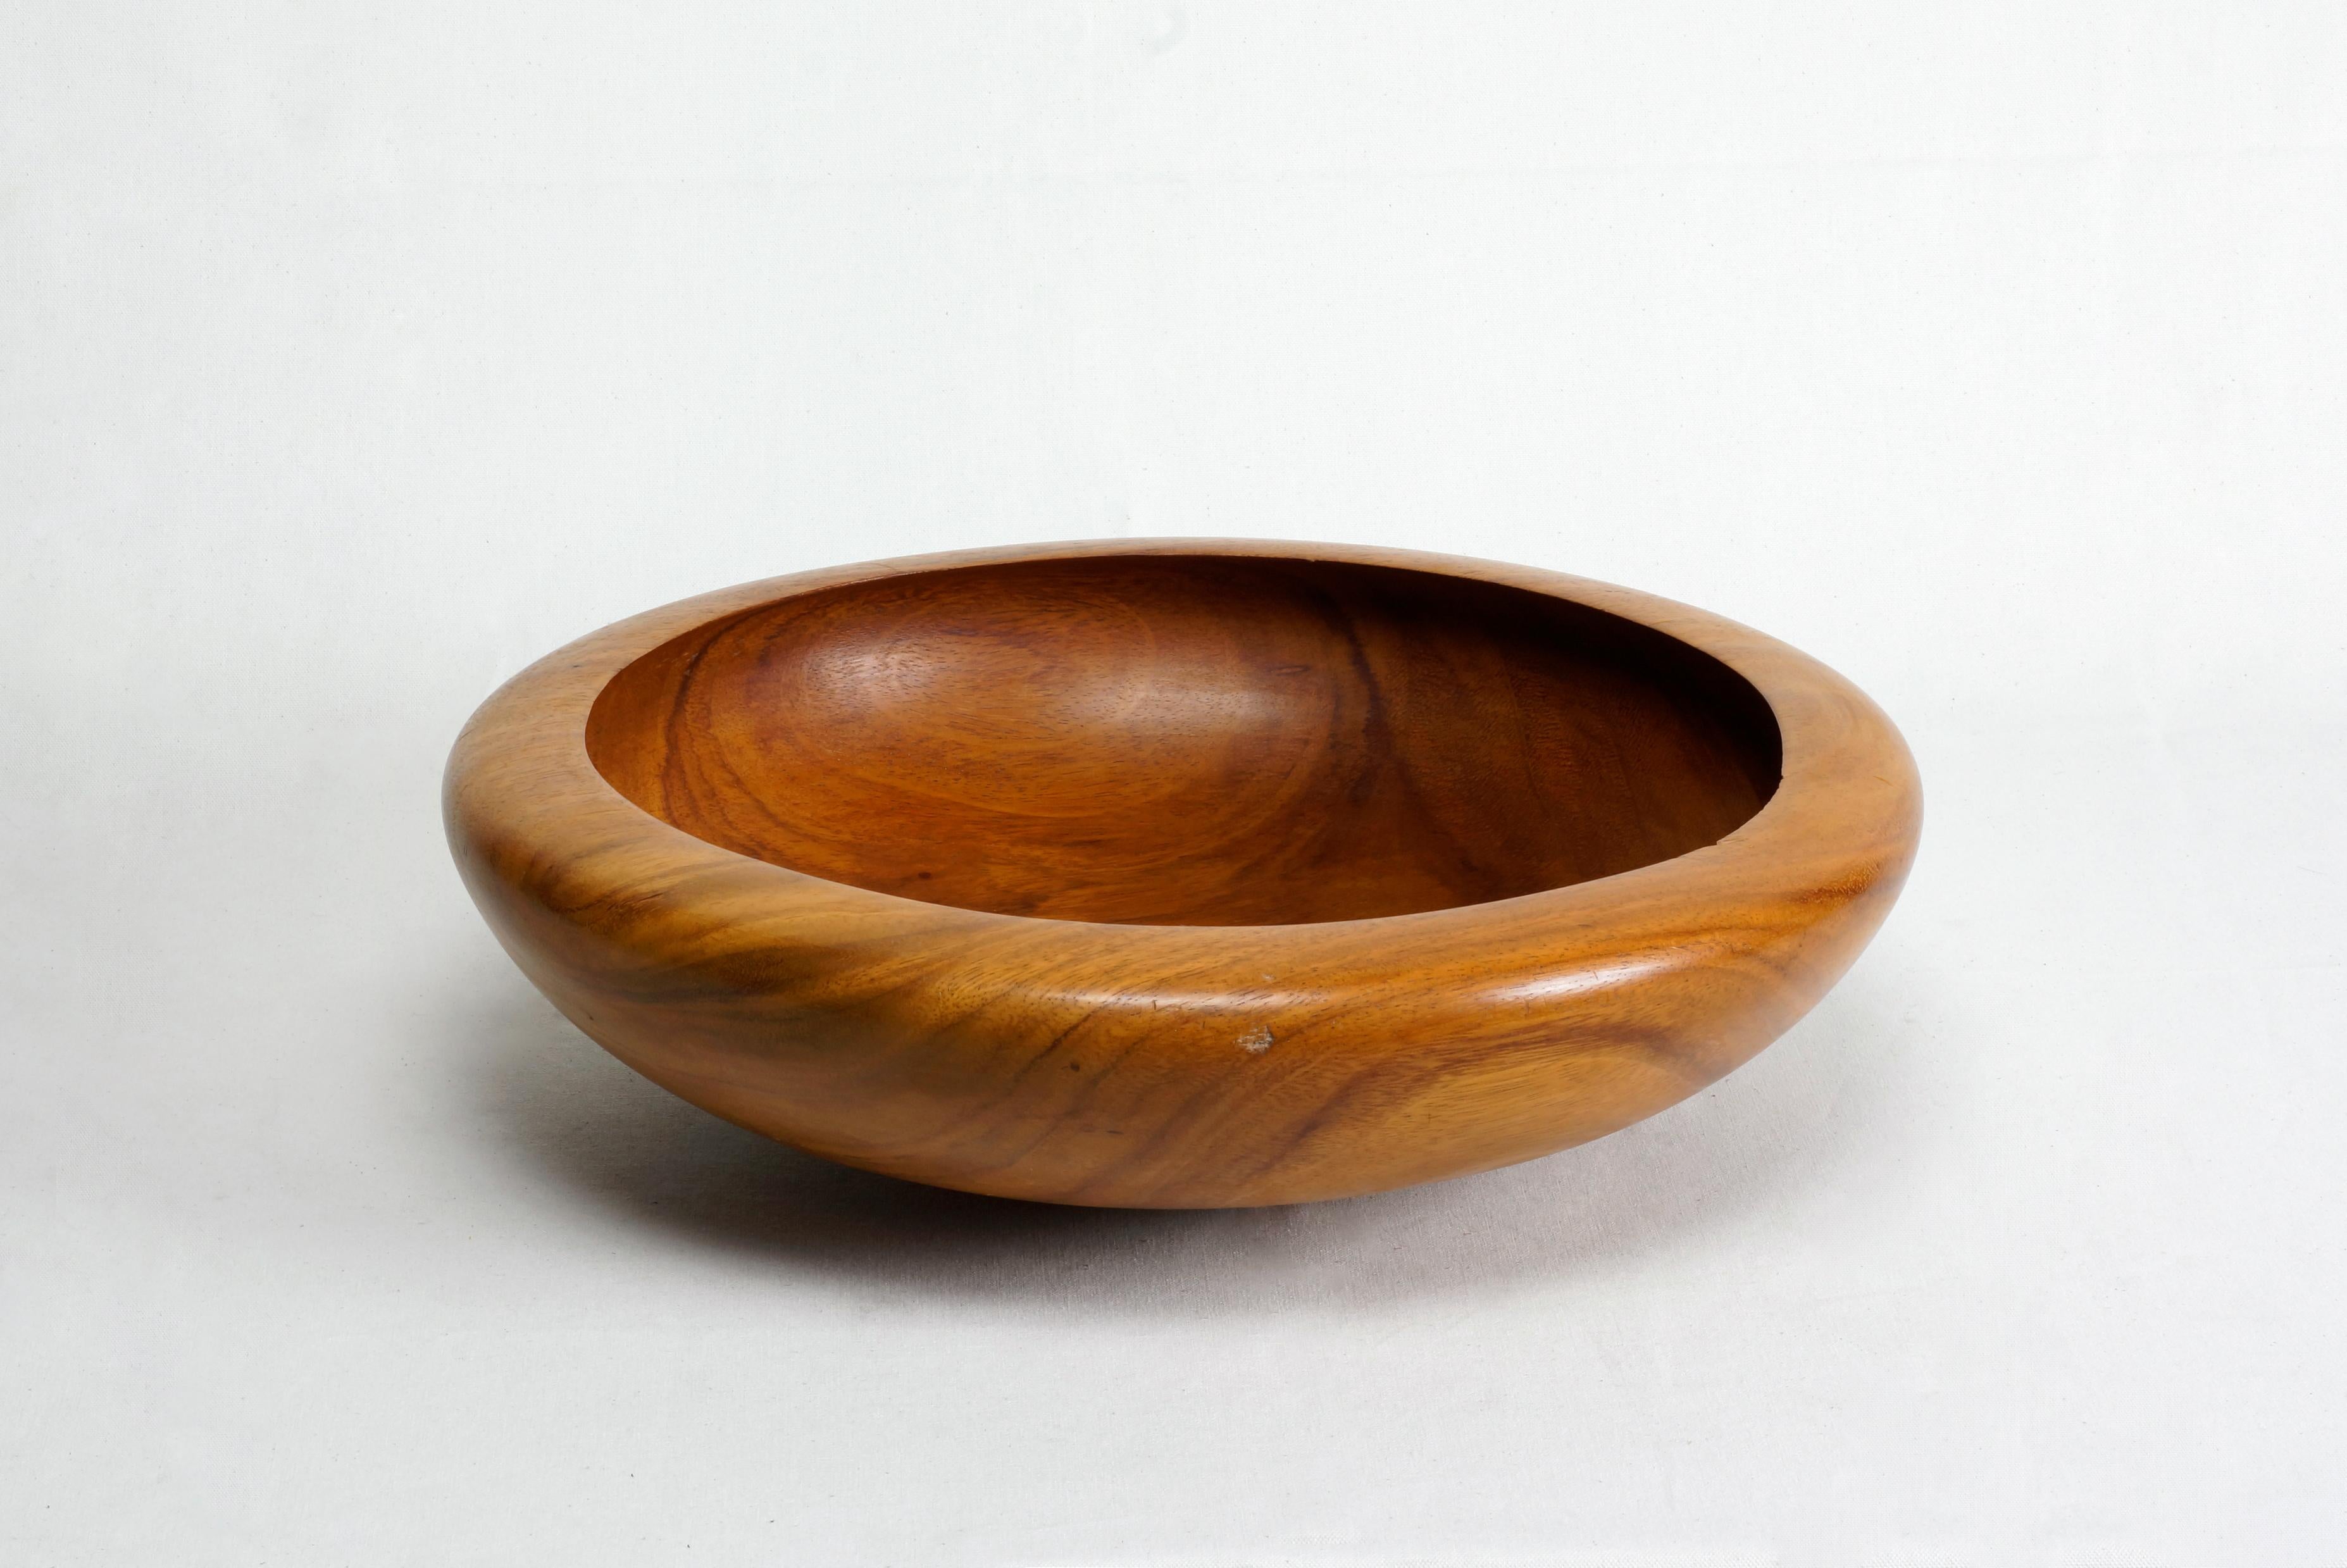 This excellent vintage bowl comes from Koa wood indigenous to Hawaii. hand-turned wood; beautiful organic shape. Footed base. Extra large size. Extra special. Vintage wood shows gentle wear as pictured. 

Dimensions: 17.5